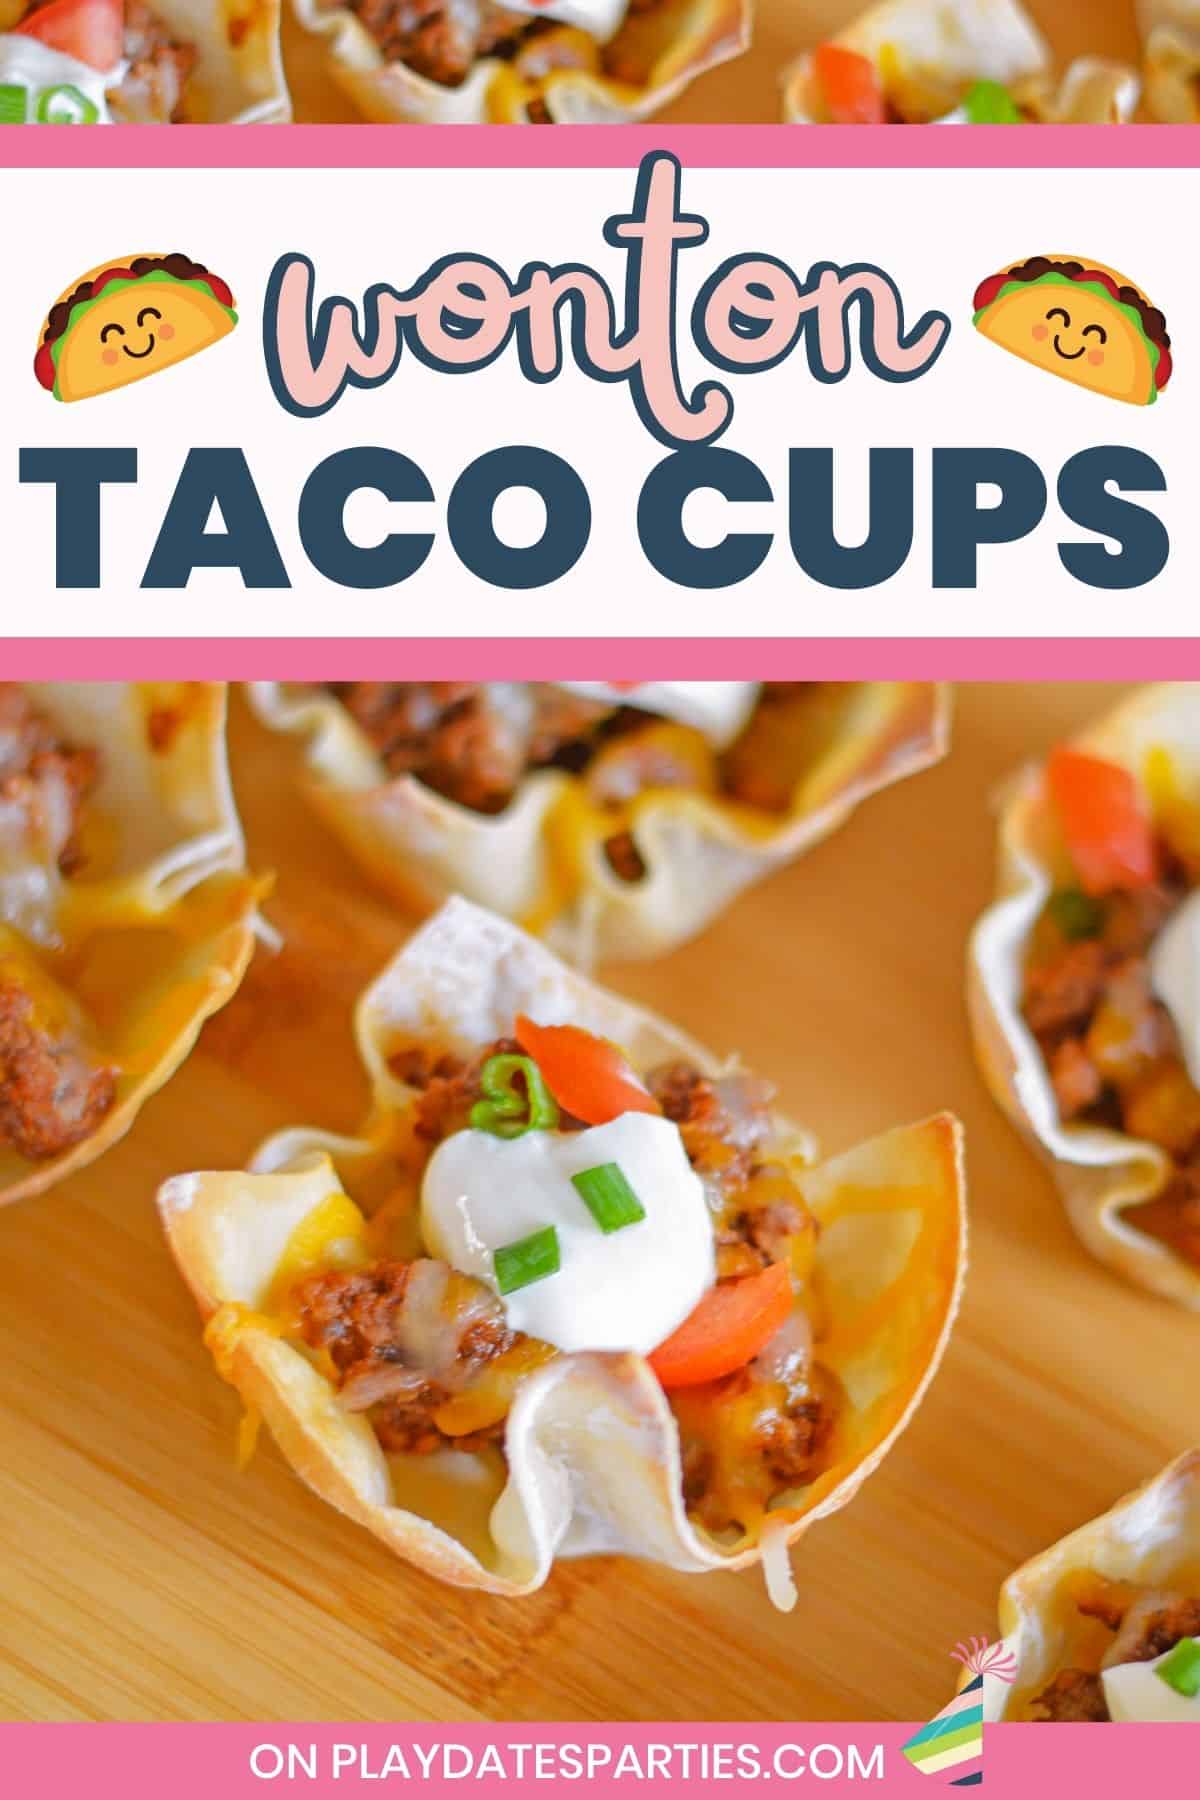 Close up of taco appetizers with text overlay wonton taco cups.